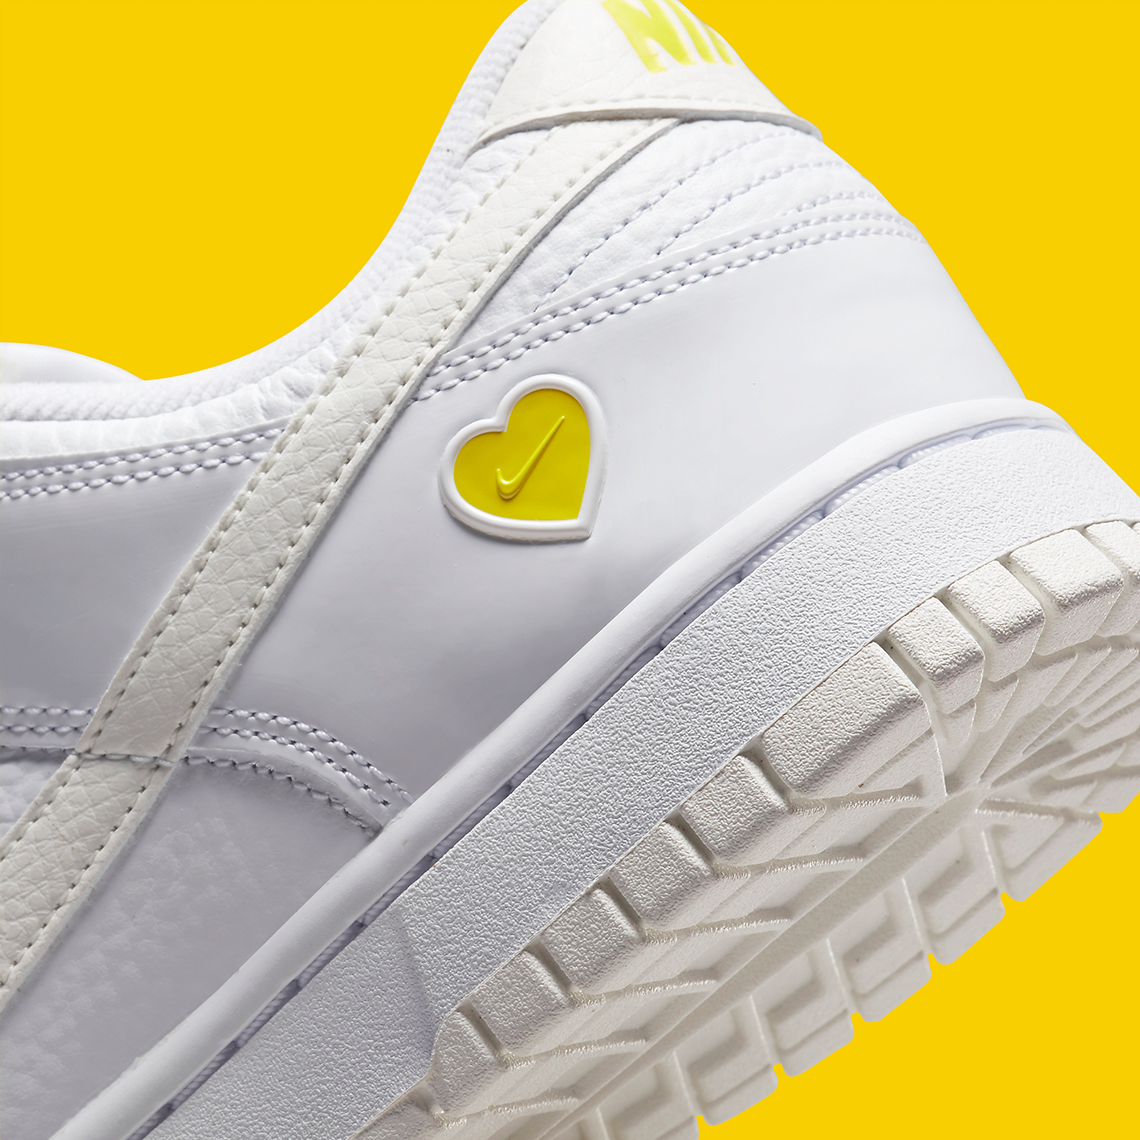 Drakes long-awaited Nike Air Force 1 sneaker collaboration may finally be hitting retail soon White Yellow Heart Fd0803 100 6